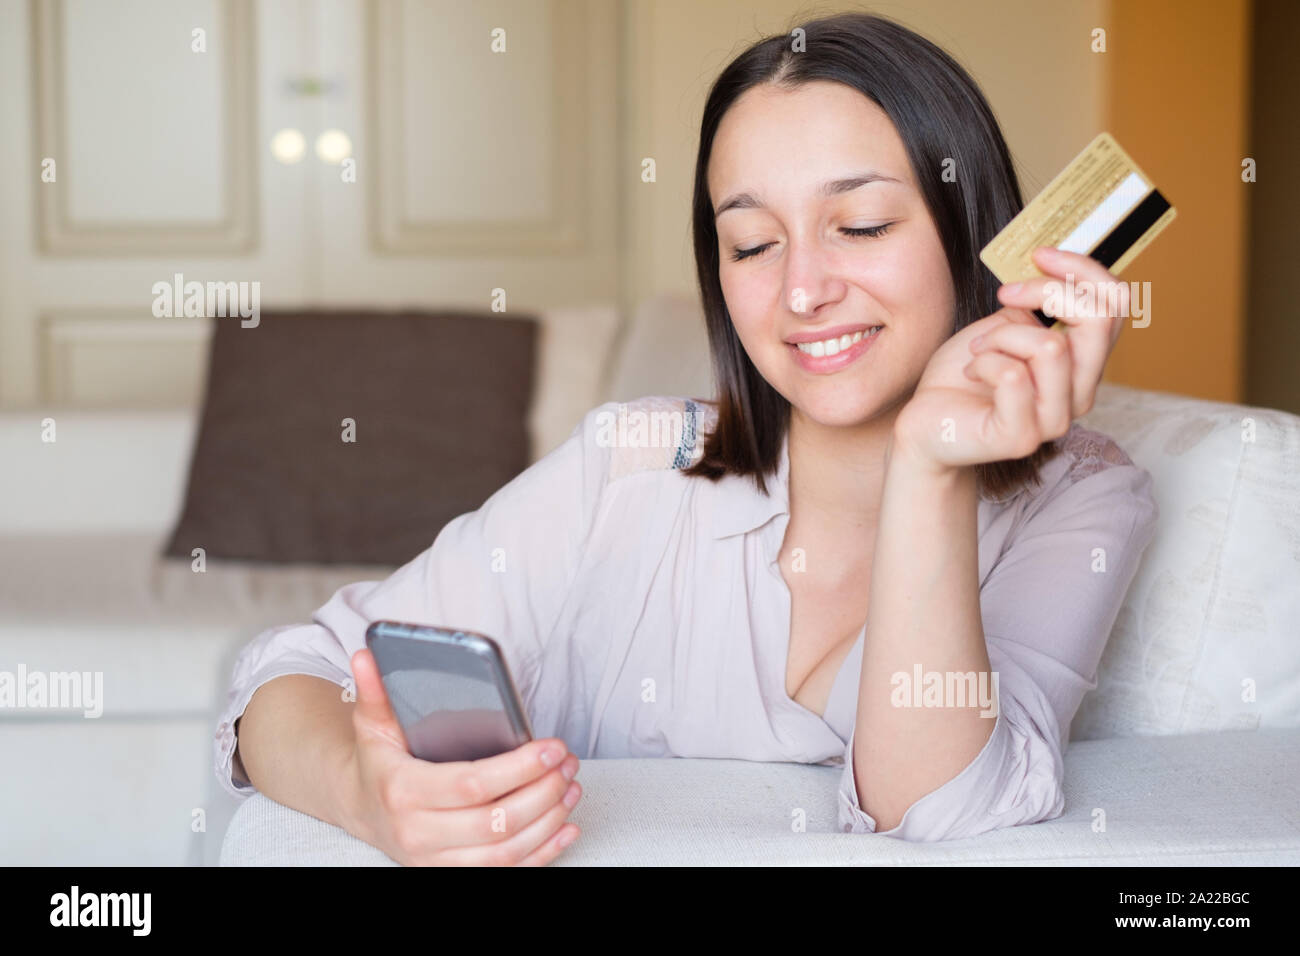 Happy woman shopping and buying online using internet Stock Photo